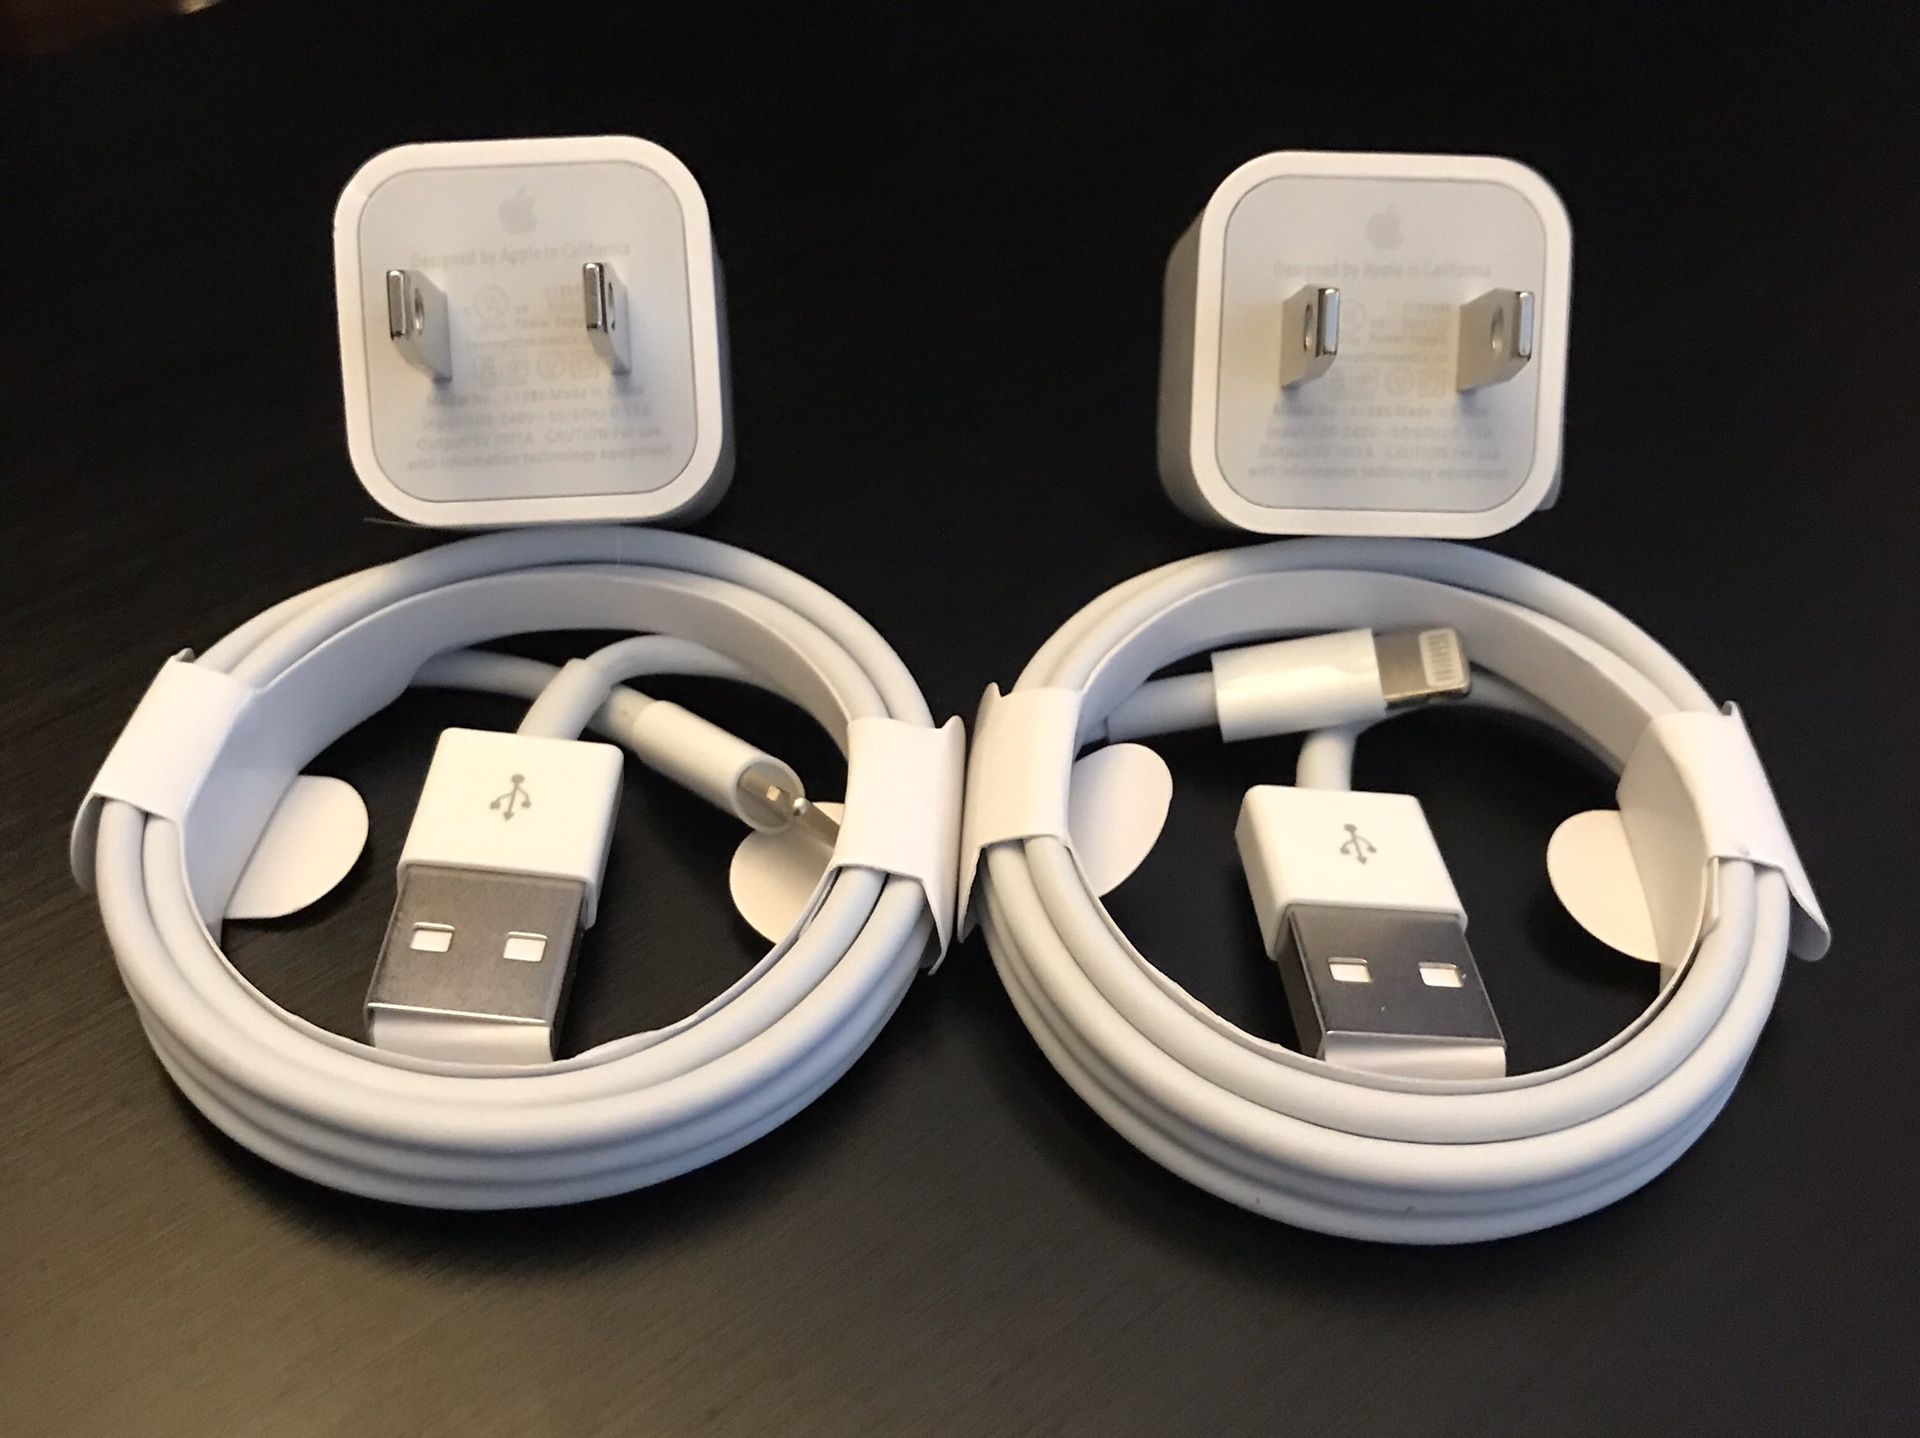 Apple IPhone Chargers 2 Sets